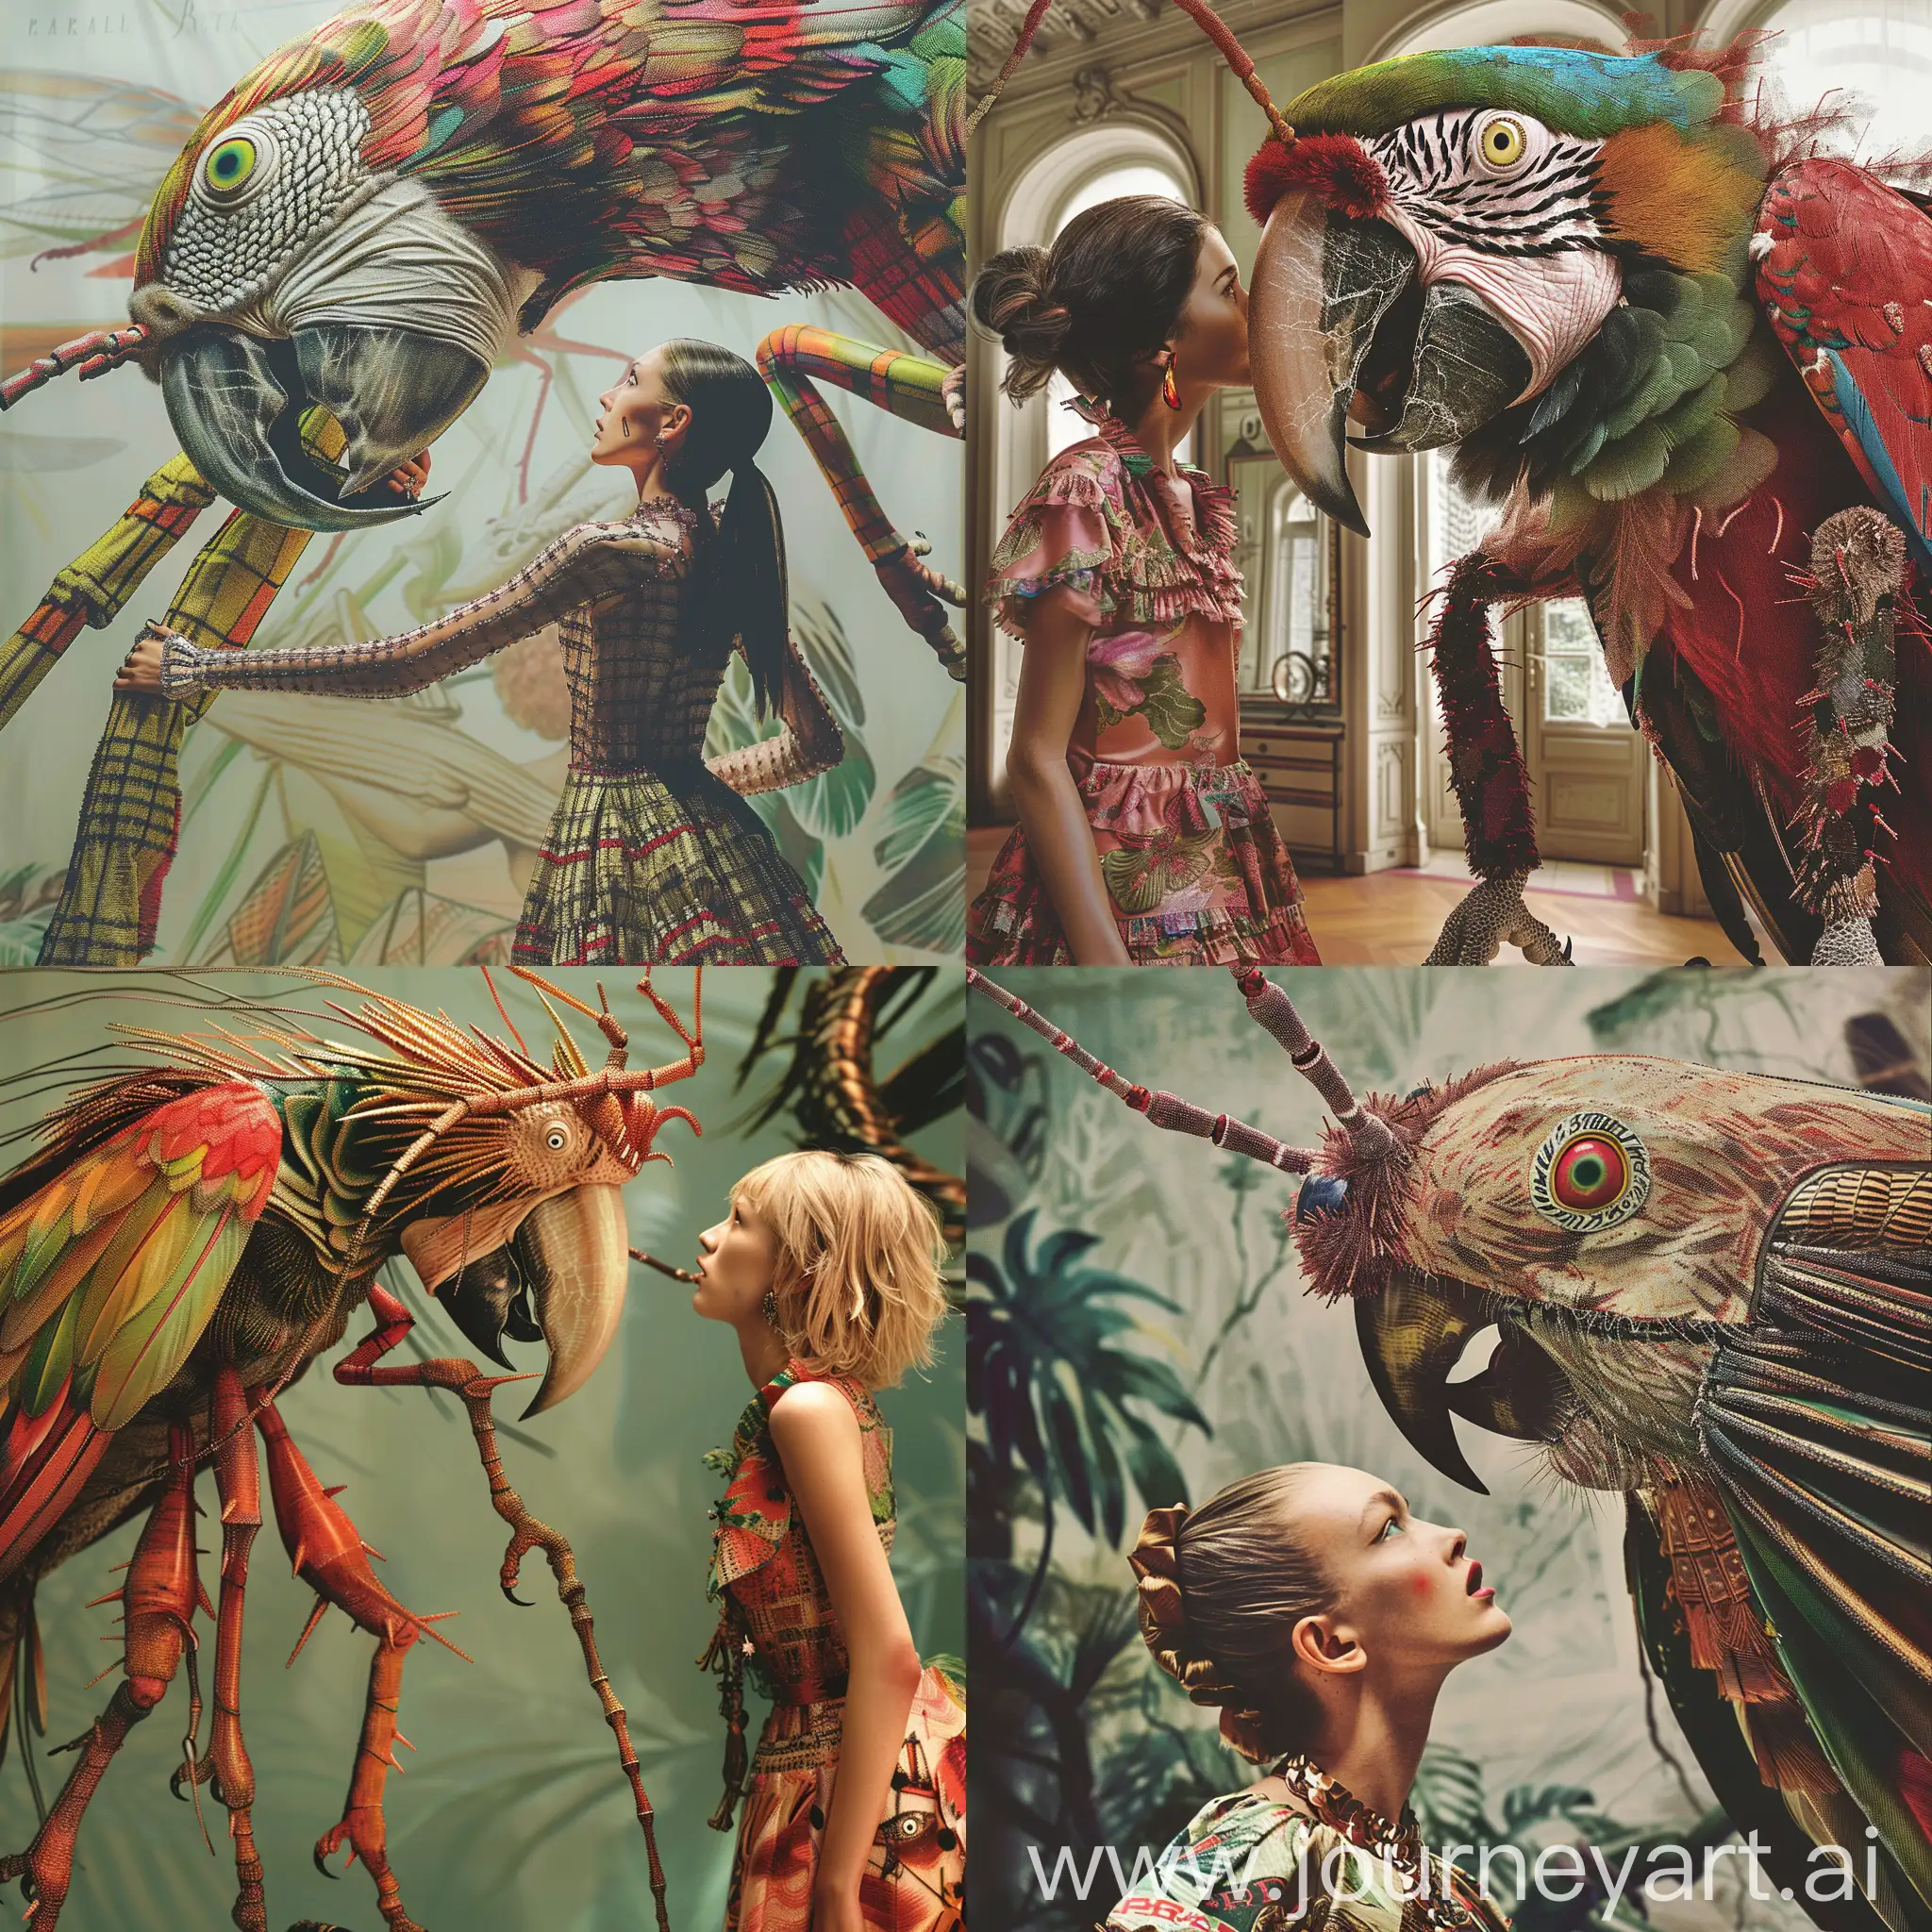 In a surreal fusion of couture and nature, a fashion-forward girl wearing an iconic Prada design is confronted by a exotic parrot in a Harper's Bazaar magazine spread. The massive insect towers over her, its grotesque features rendered in intricate detail, reminiscent of a child's naive, bright-colored drawing.Embrace the bizarre beauty of this scene captured in high-detail,showcasing the finest drawing techniques with thin filigree lines and intricate pointillism  art masterpiece,12K